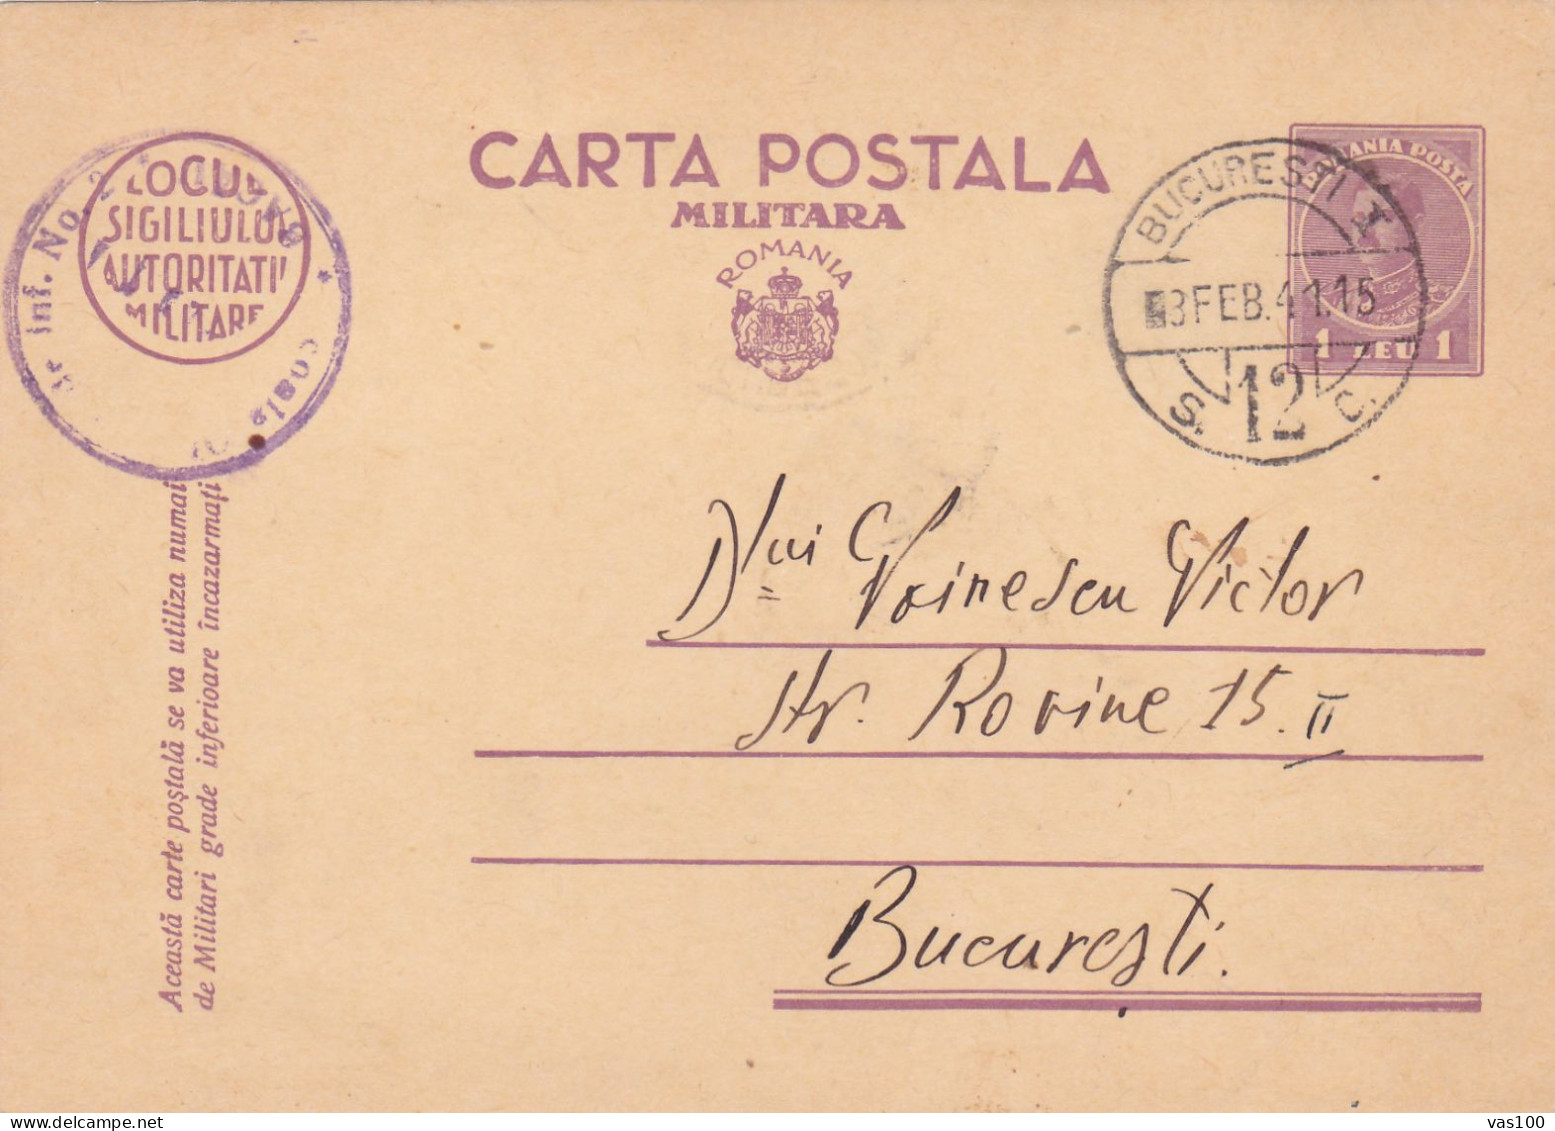 Romania, 1941, WWII  Censored, CENSOR, MILITARY POSTCARD STATIONERY - World War 2 Letters